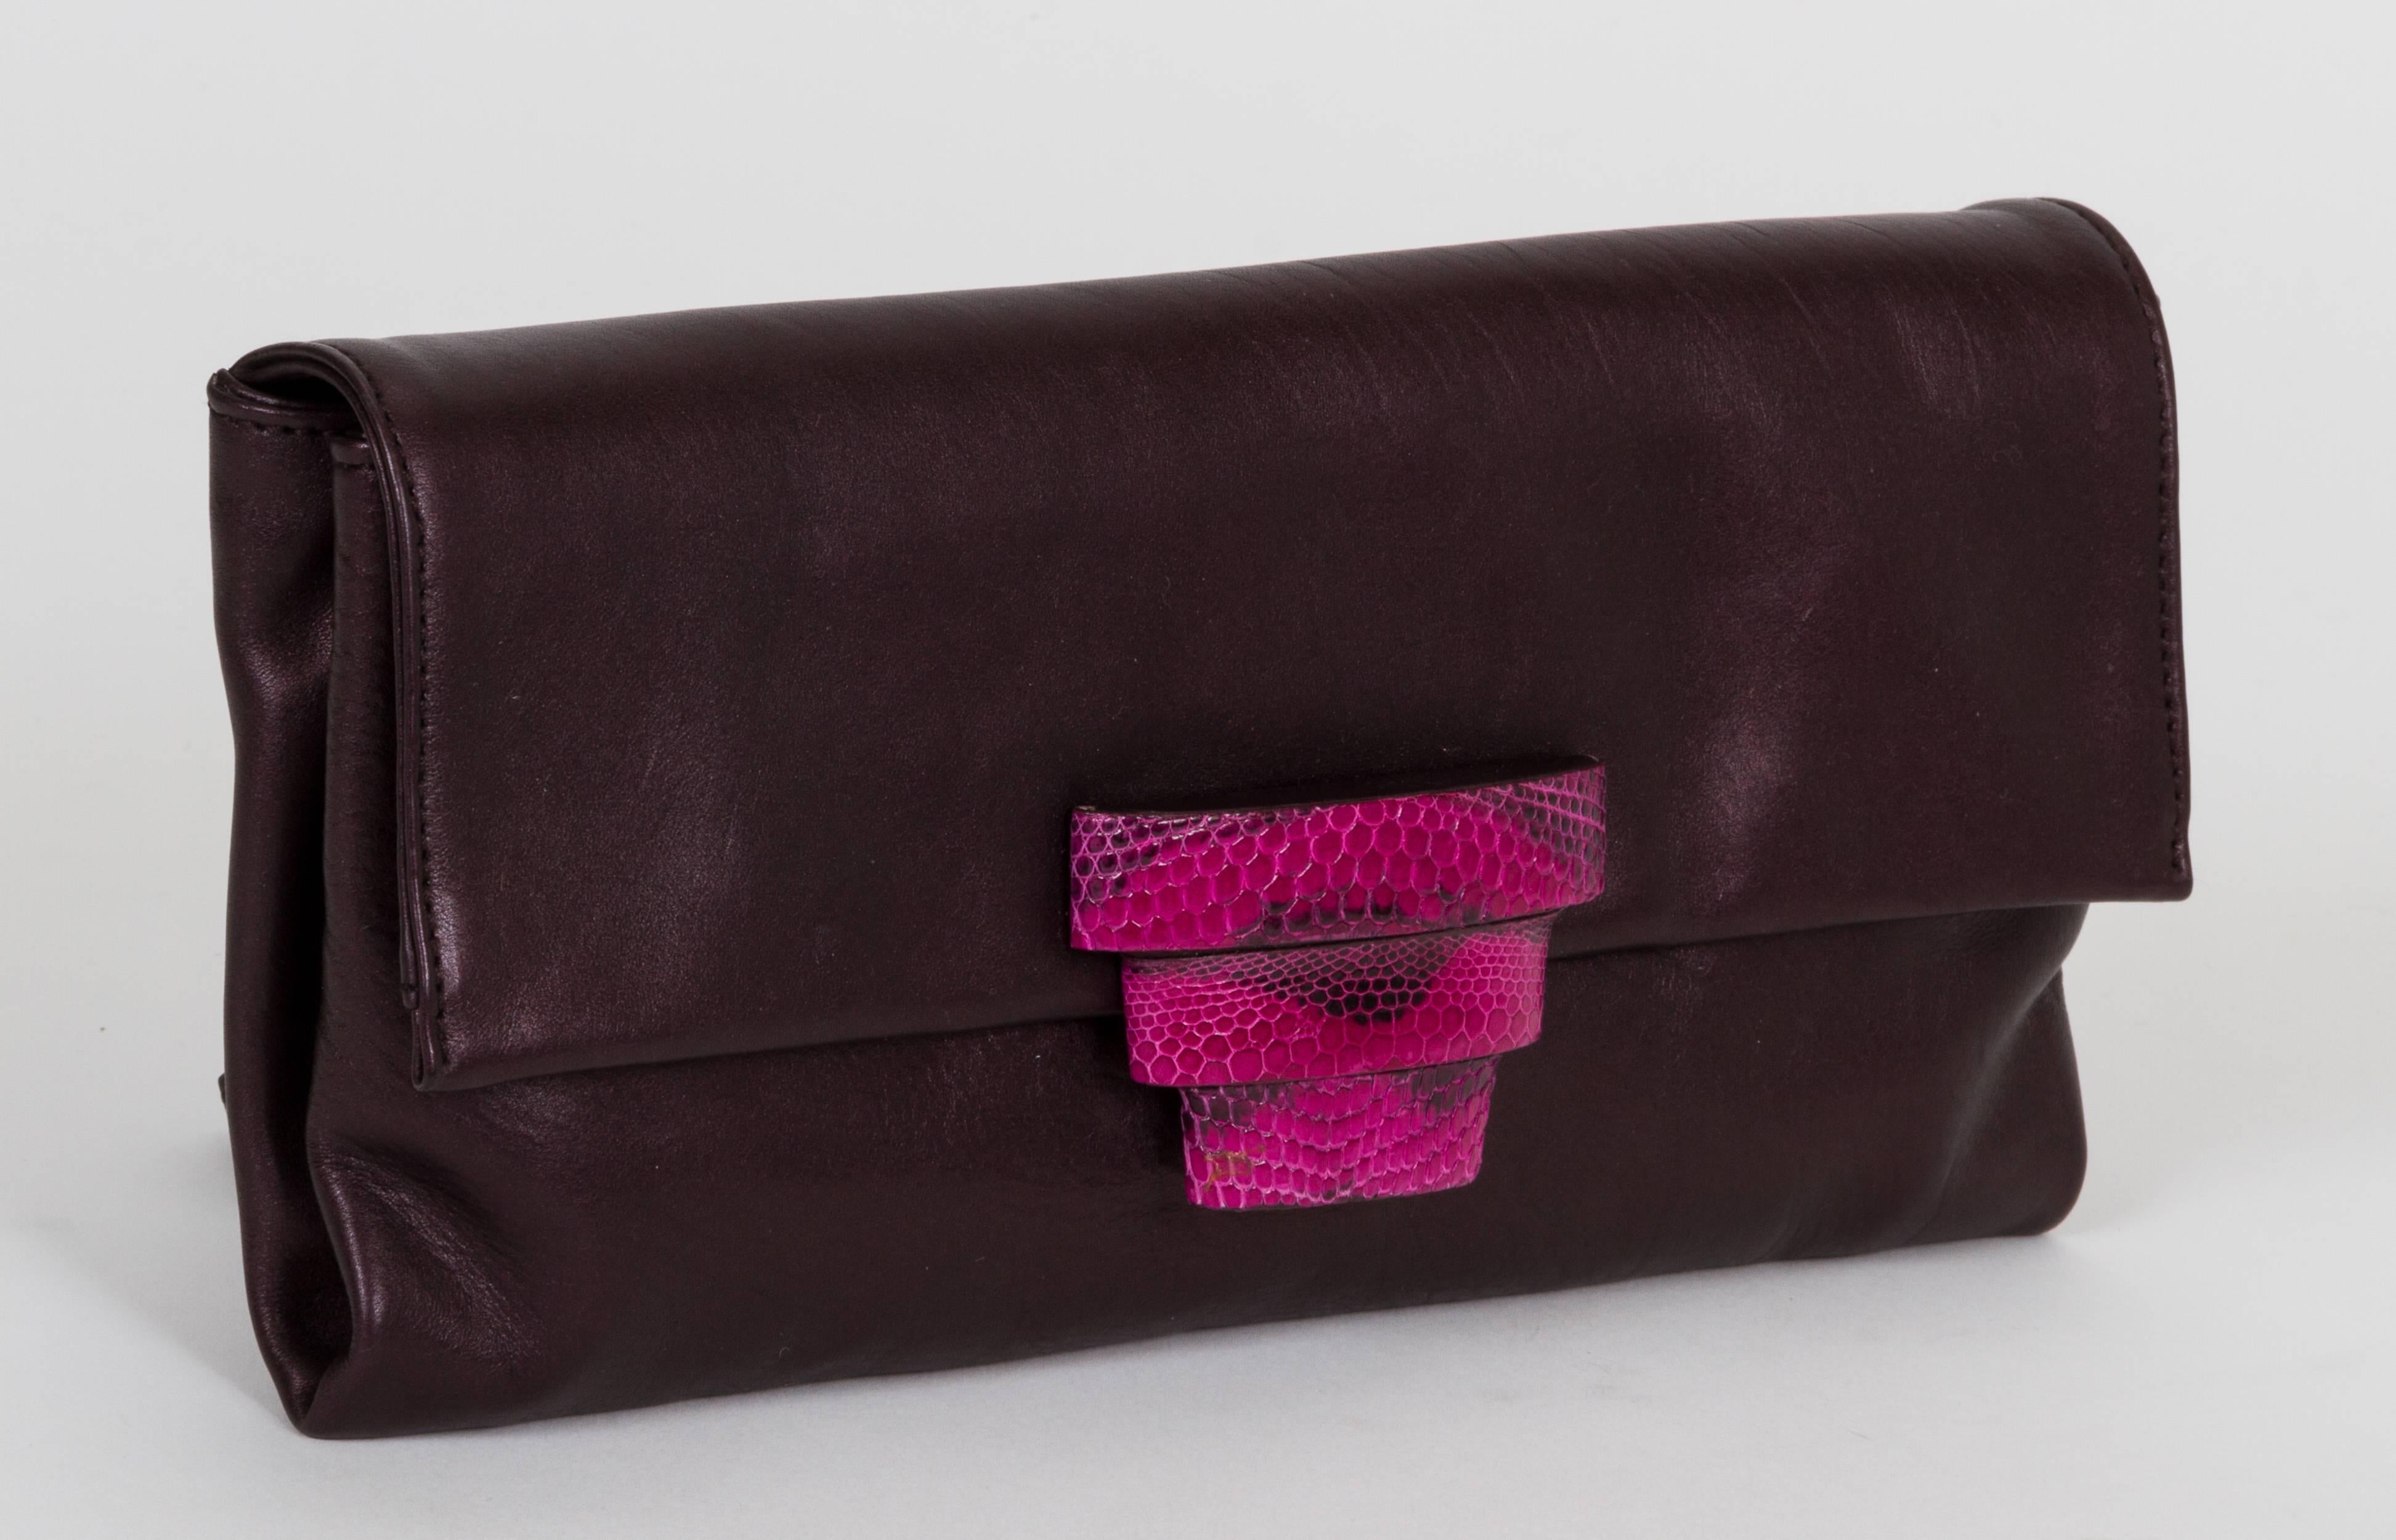 Prada evening clutch in soft purple lambskin with fuchsia python clasp detail. Immaculate pink silk interior with zipped pocket. Comes with original dust cover. Item does not ship to California due to wildlife regulation.
